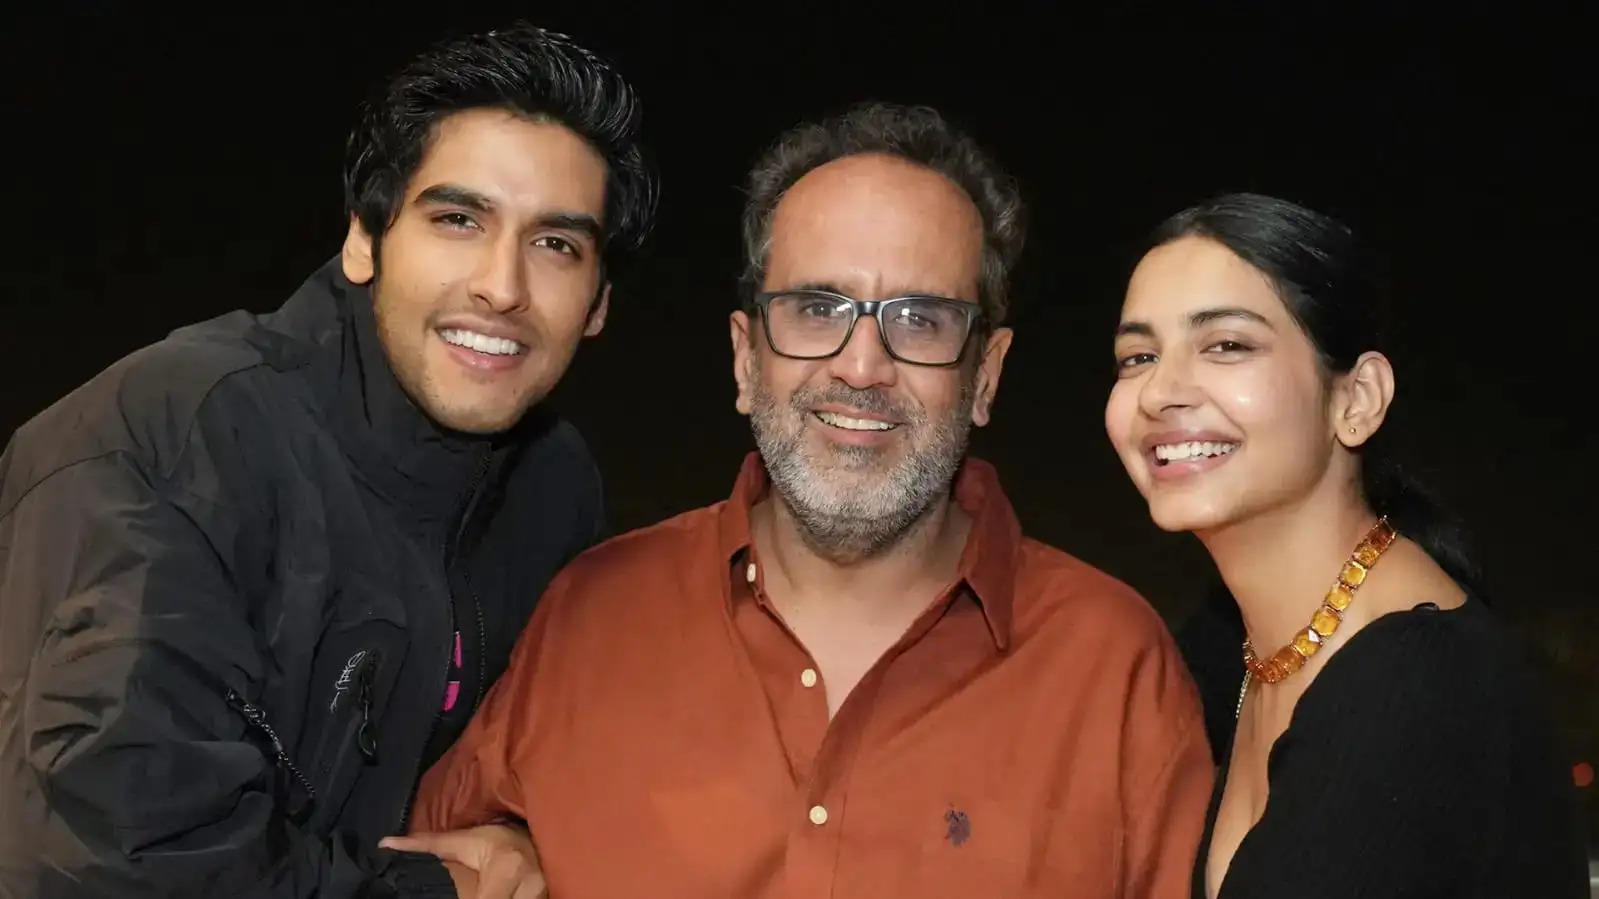 Aanand L Rai Throws Wrap-Up Party for ‘Nakhrewaalii’ Cast & Crew, along with New Talents Ansh Duggal and Pragati Srivastava!